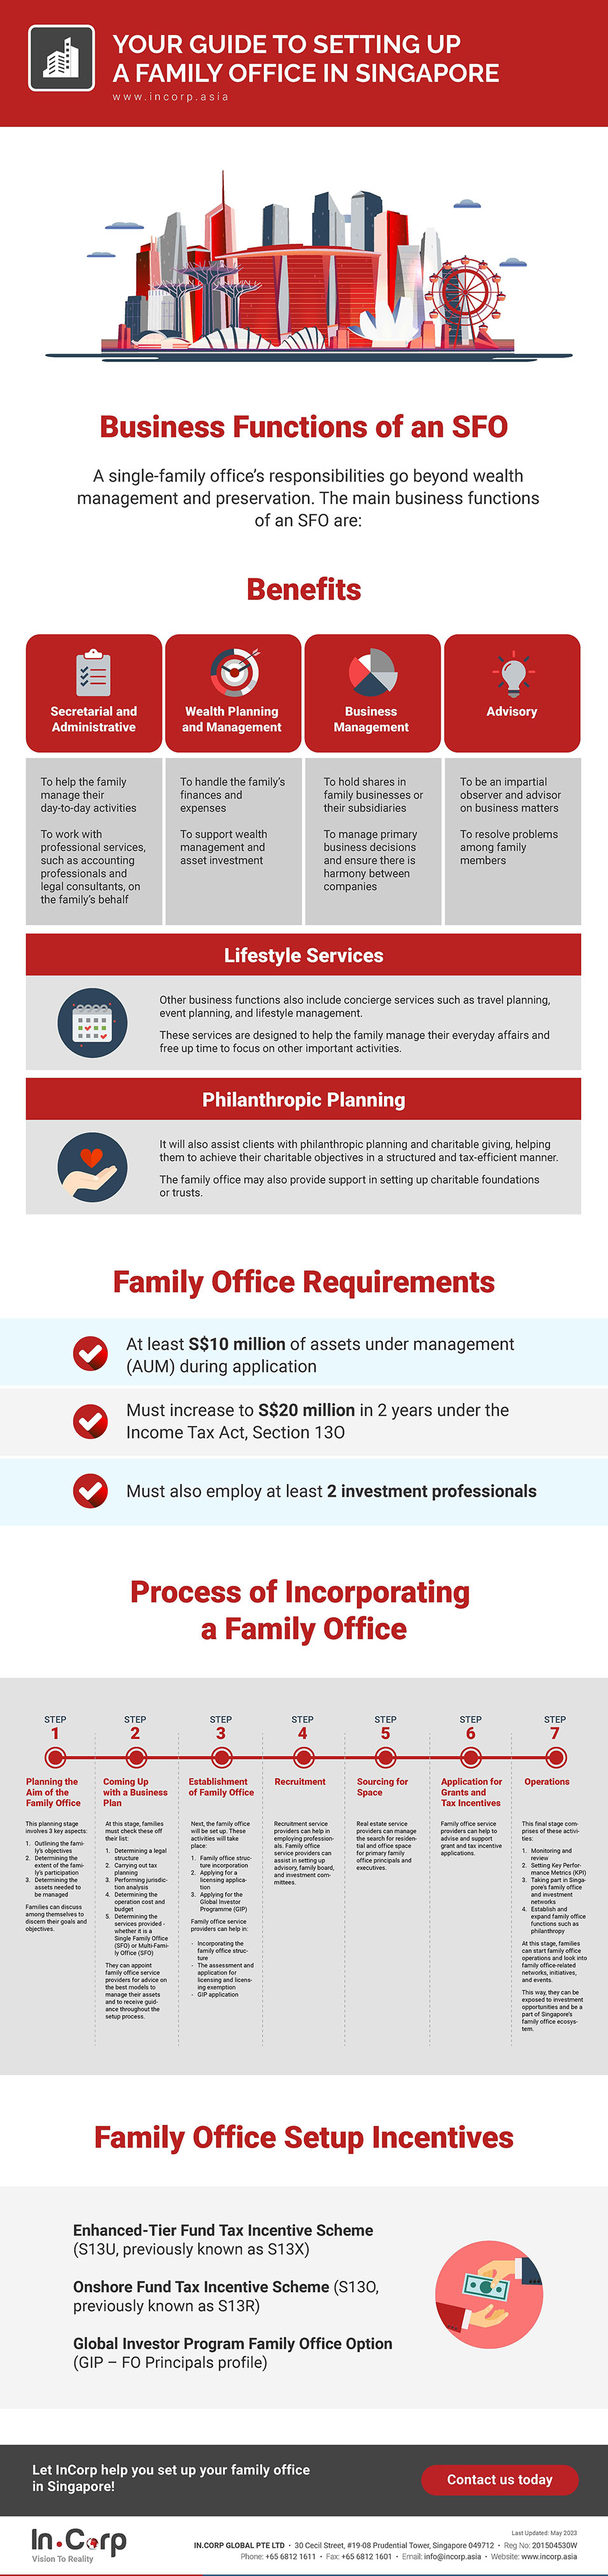 Building a Legacy: How to Set Up a Family Office in Singapore